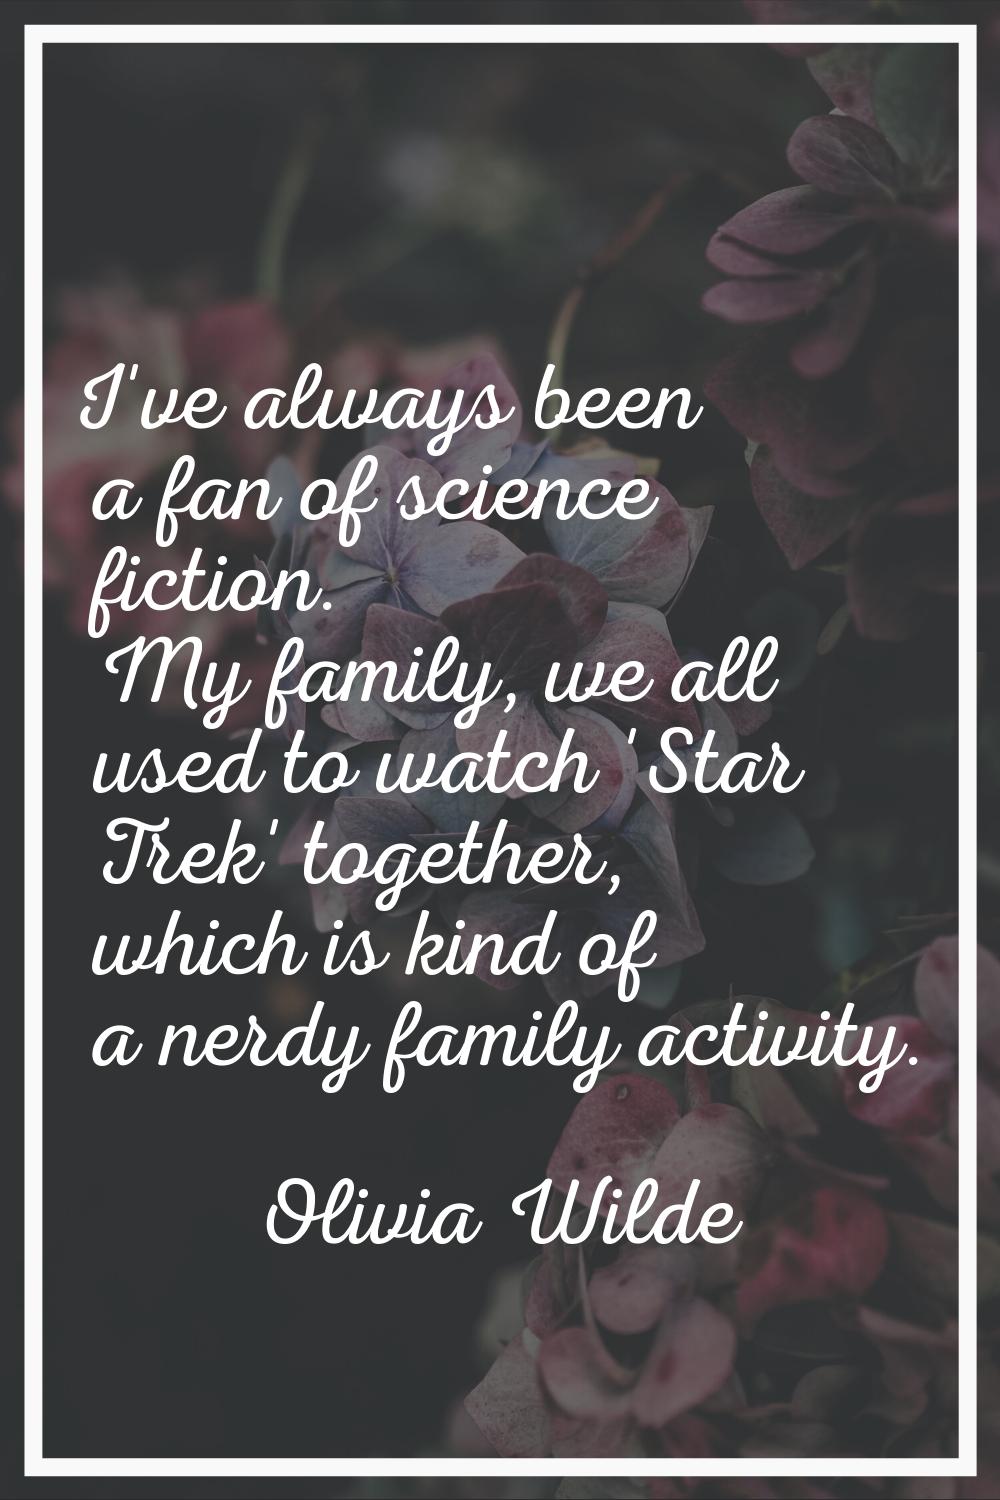 I've always been a fan of science fiction. My family, we all used to watch 'Star Trek' together, wh